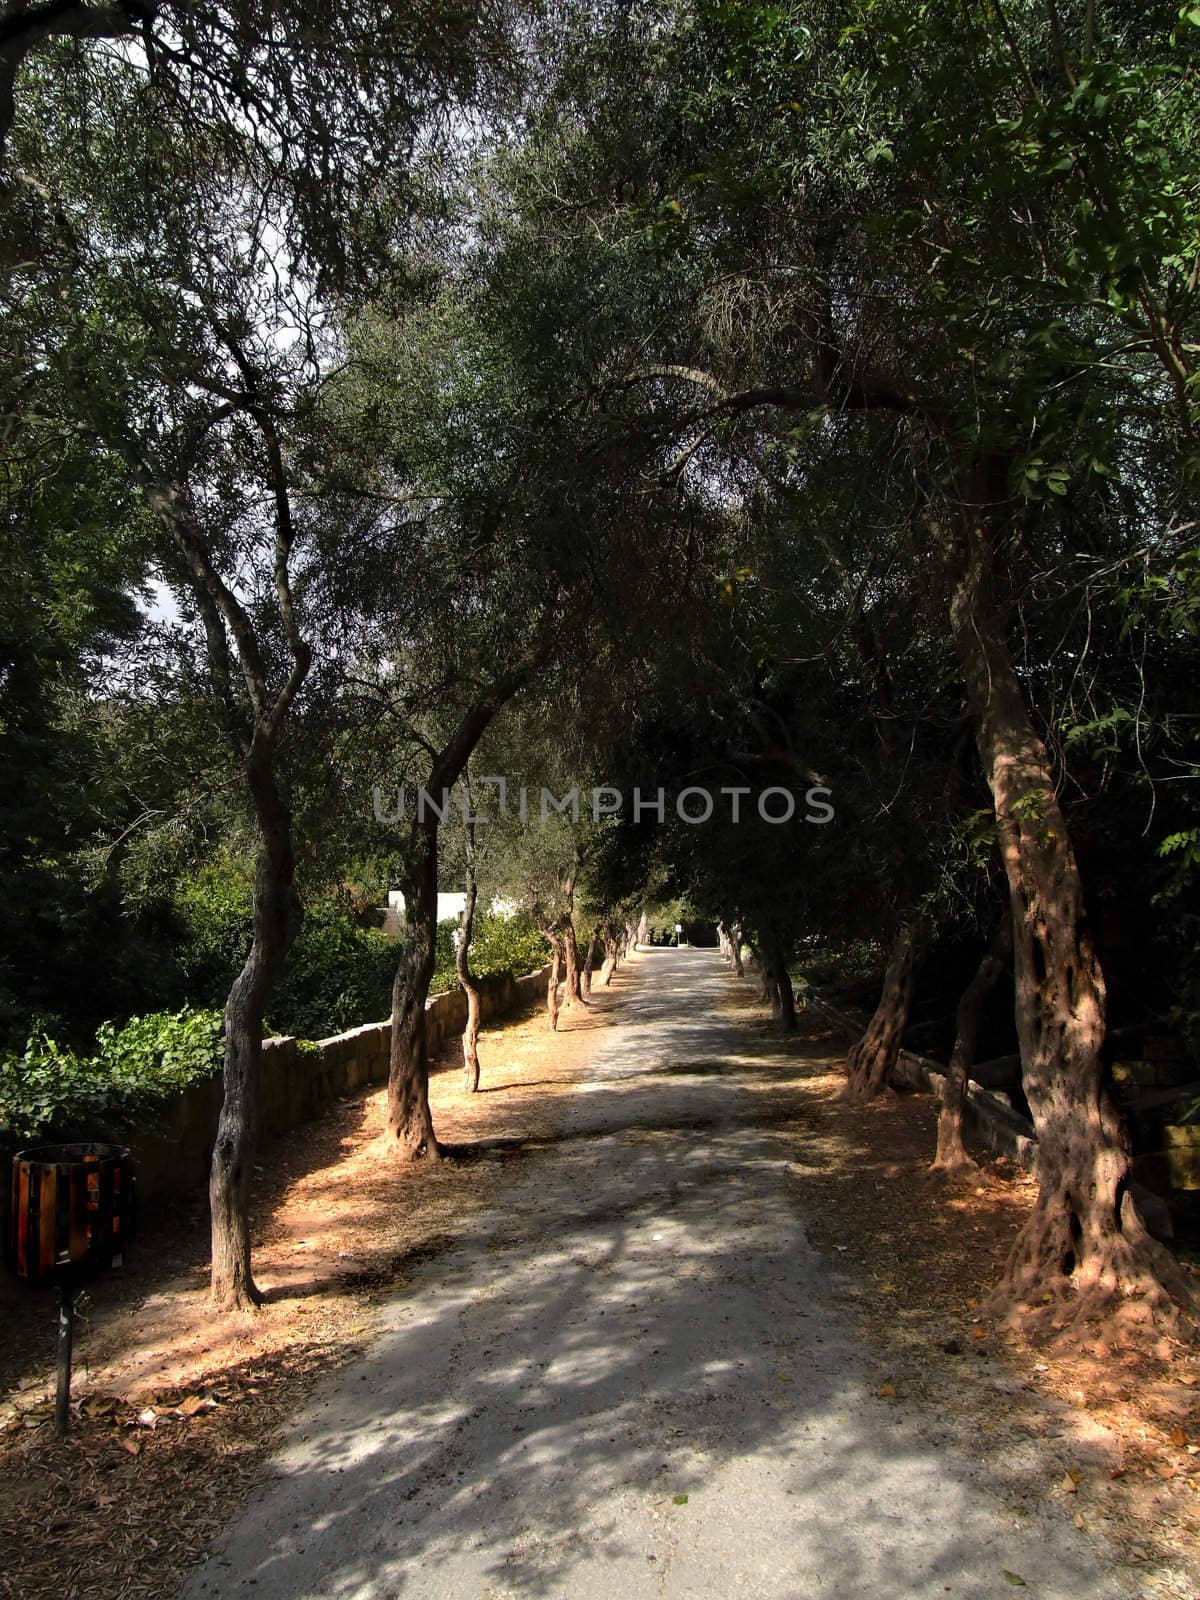 Pathway along olive trees in a small forest in Malta